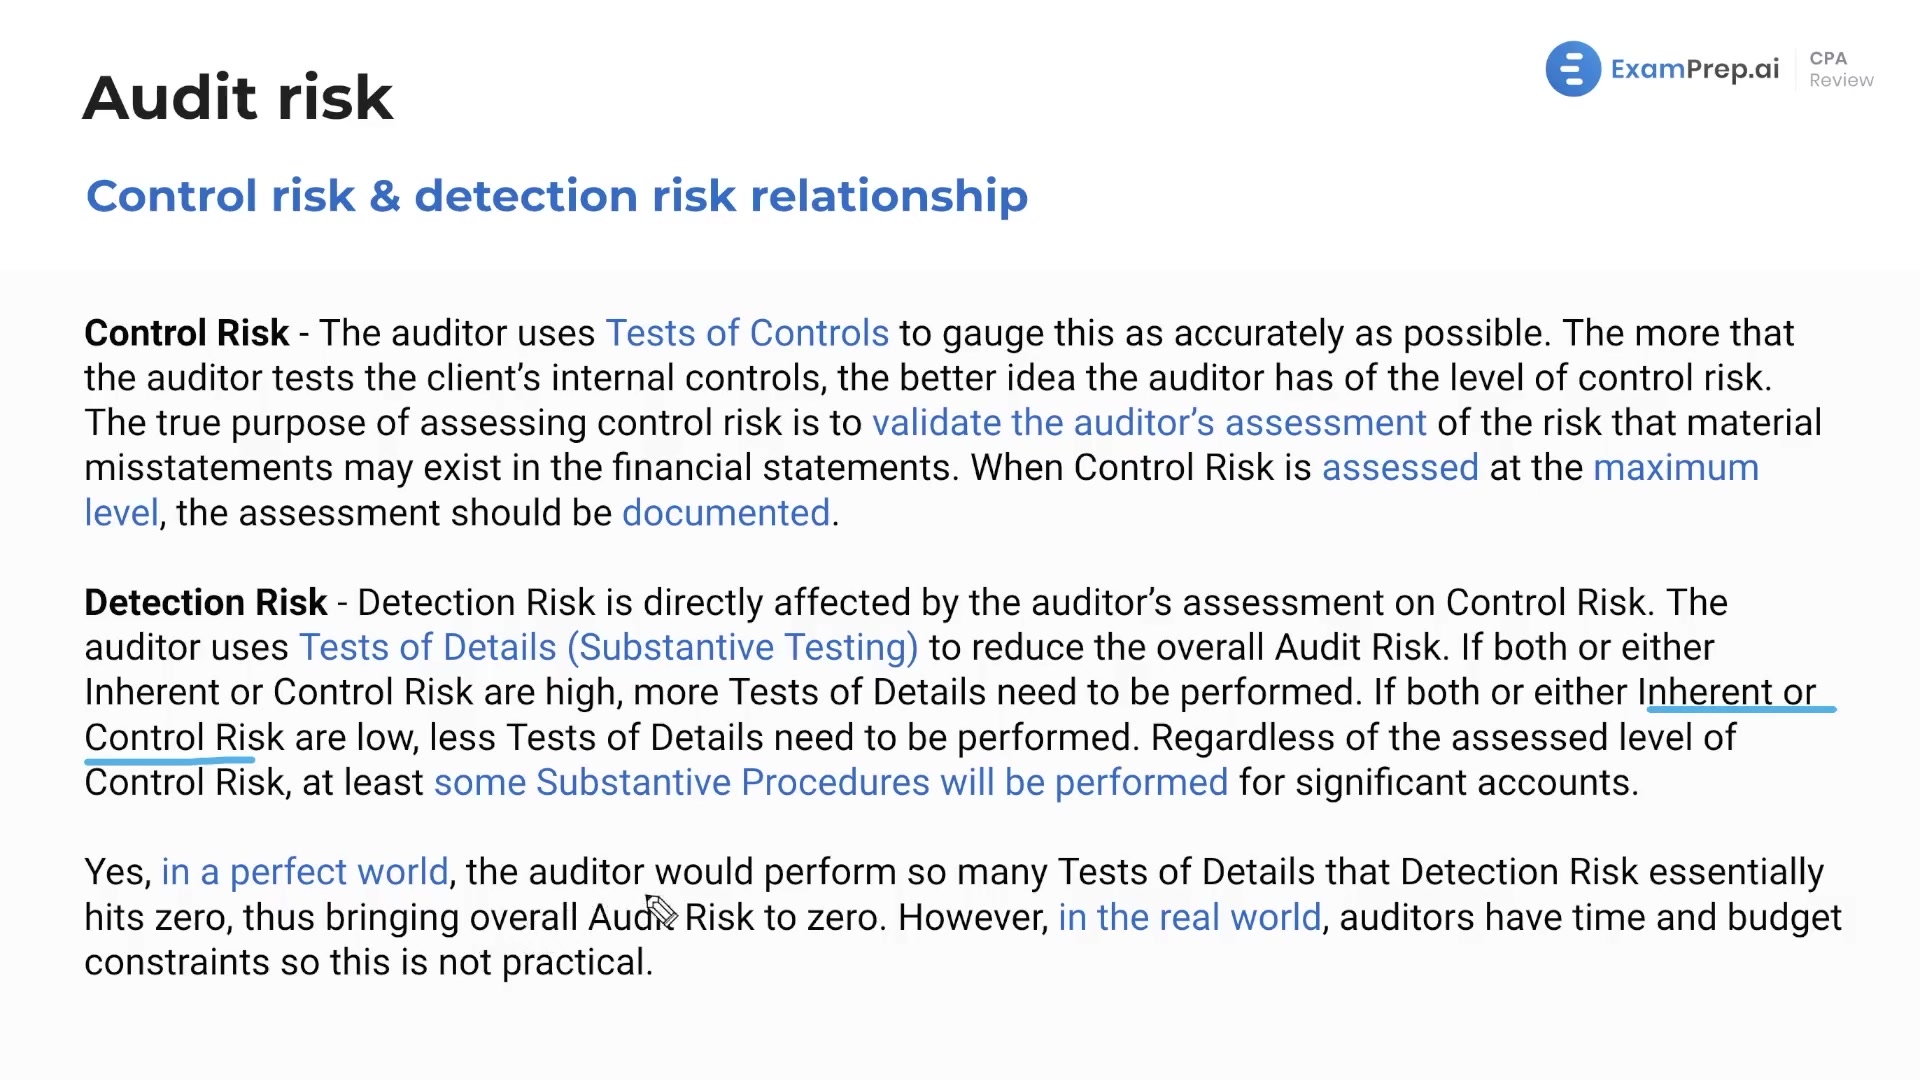 Inherent Risk, Control Risk, and Detection Risk lesson thumbnail